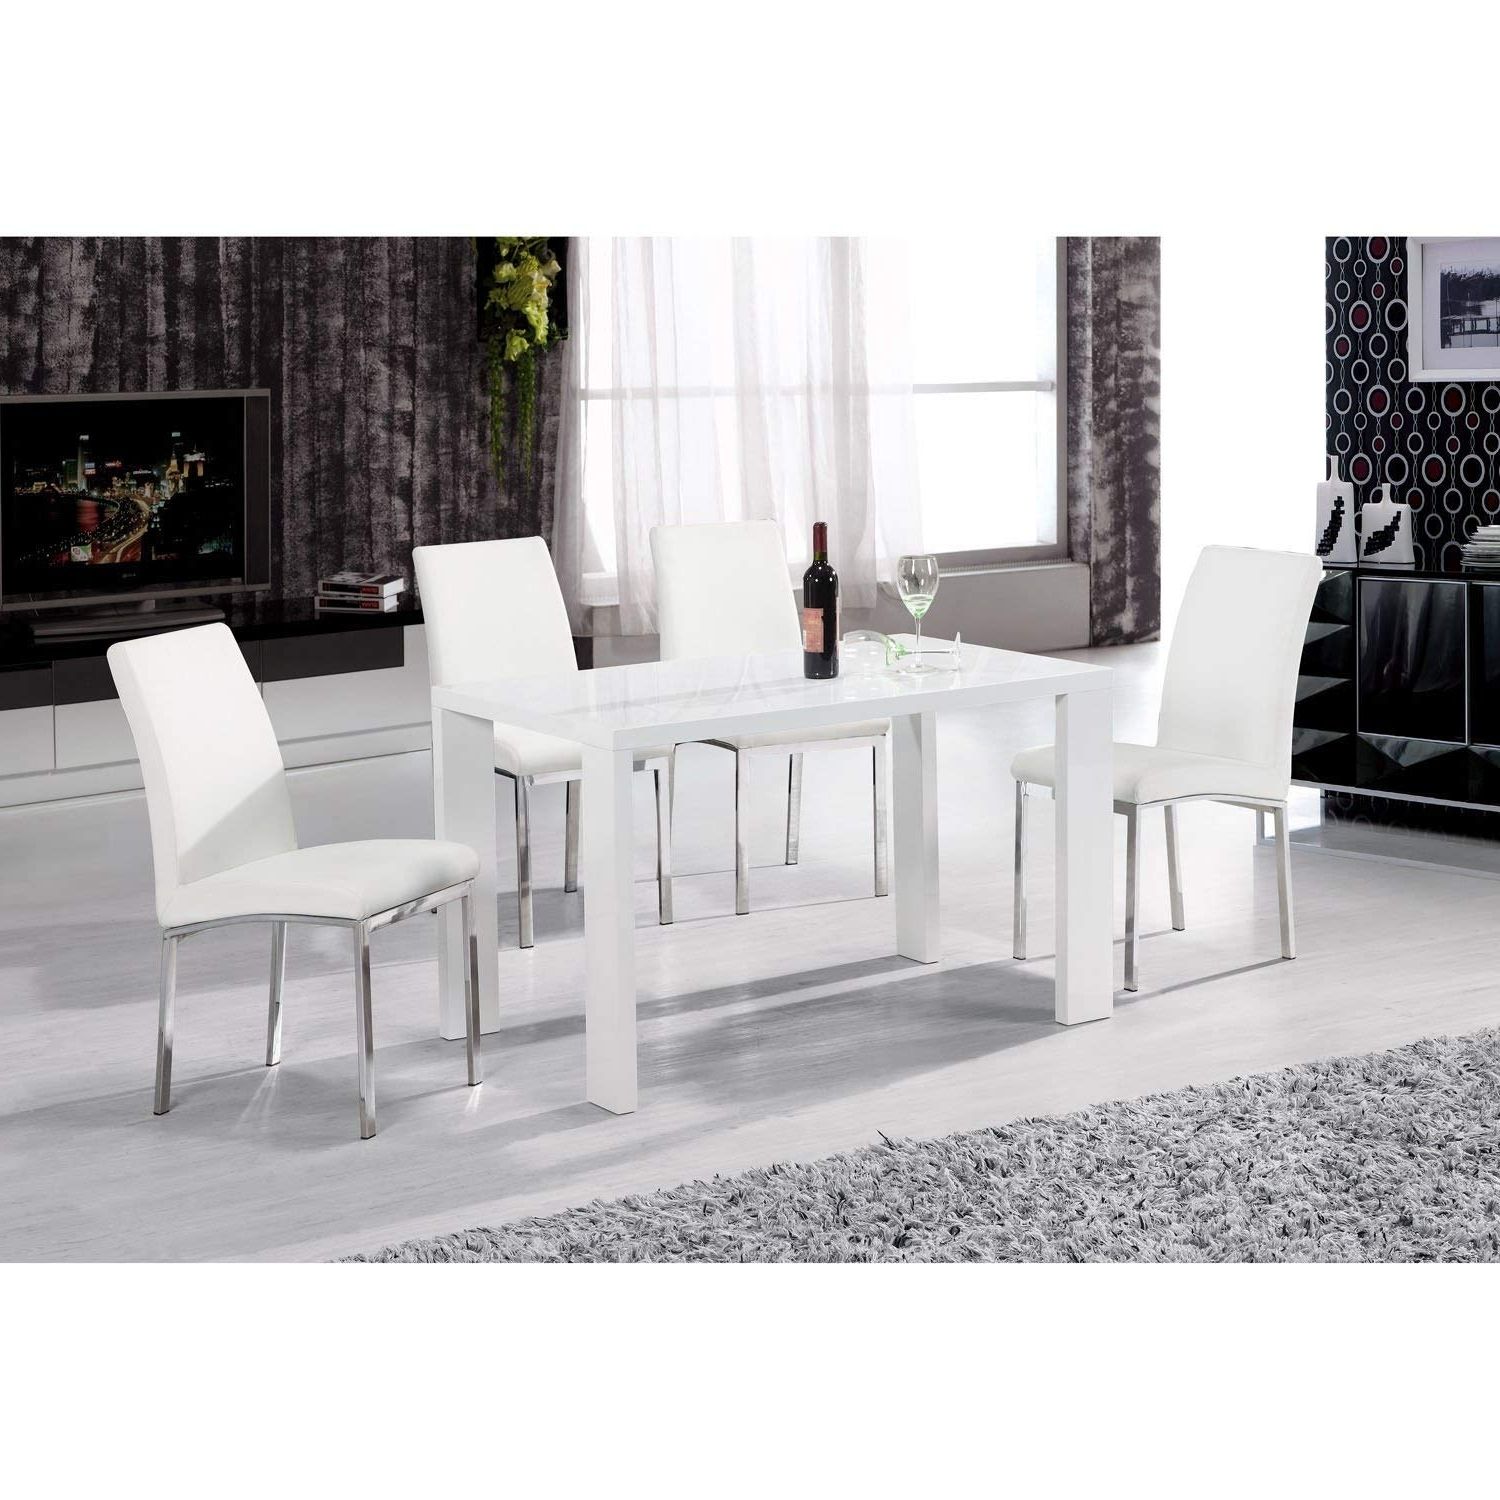 White Gloss Dining Furniture Within Well Known Heartlands Peru White High Gloss 130cm Dining Table In Wood (View 20 of 25)